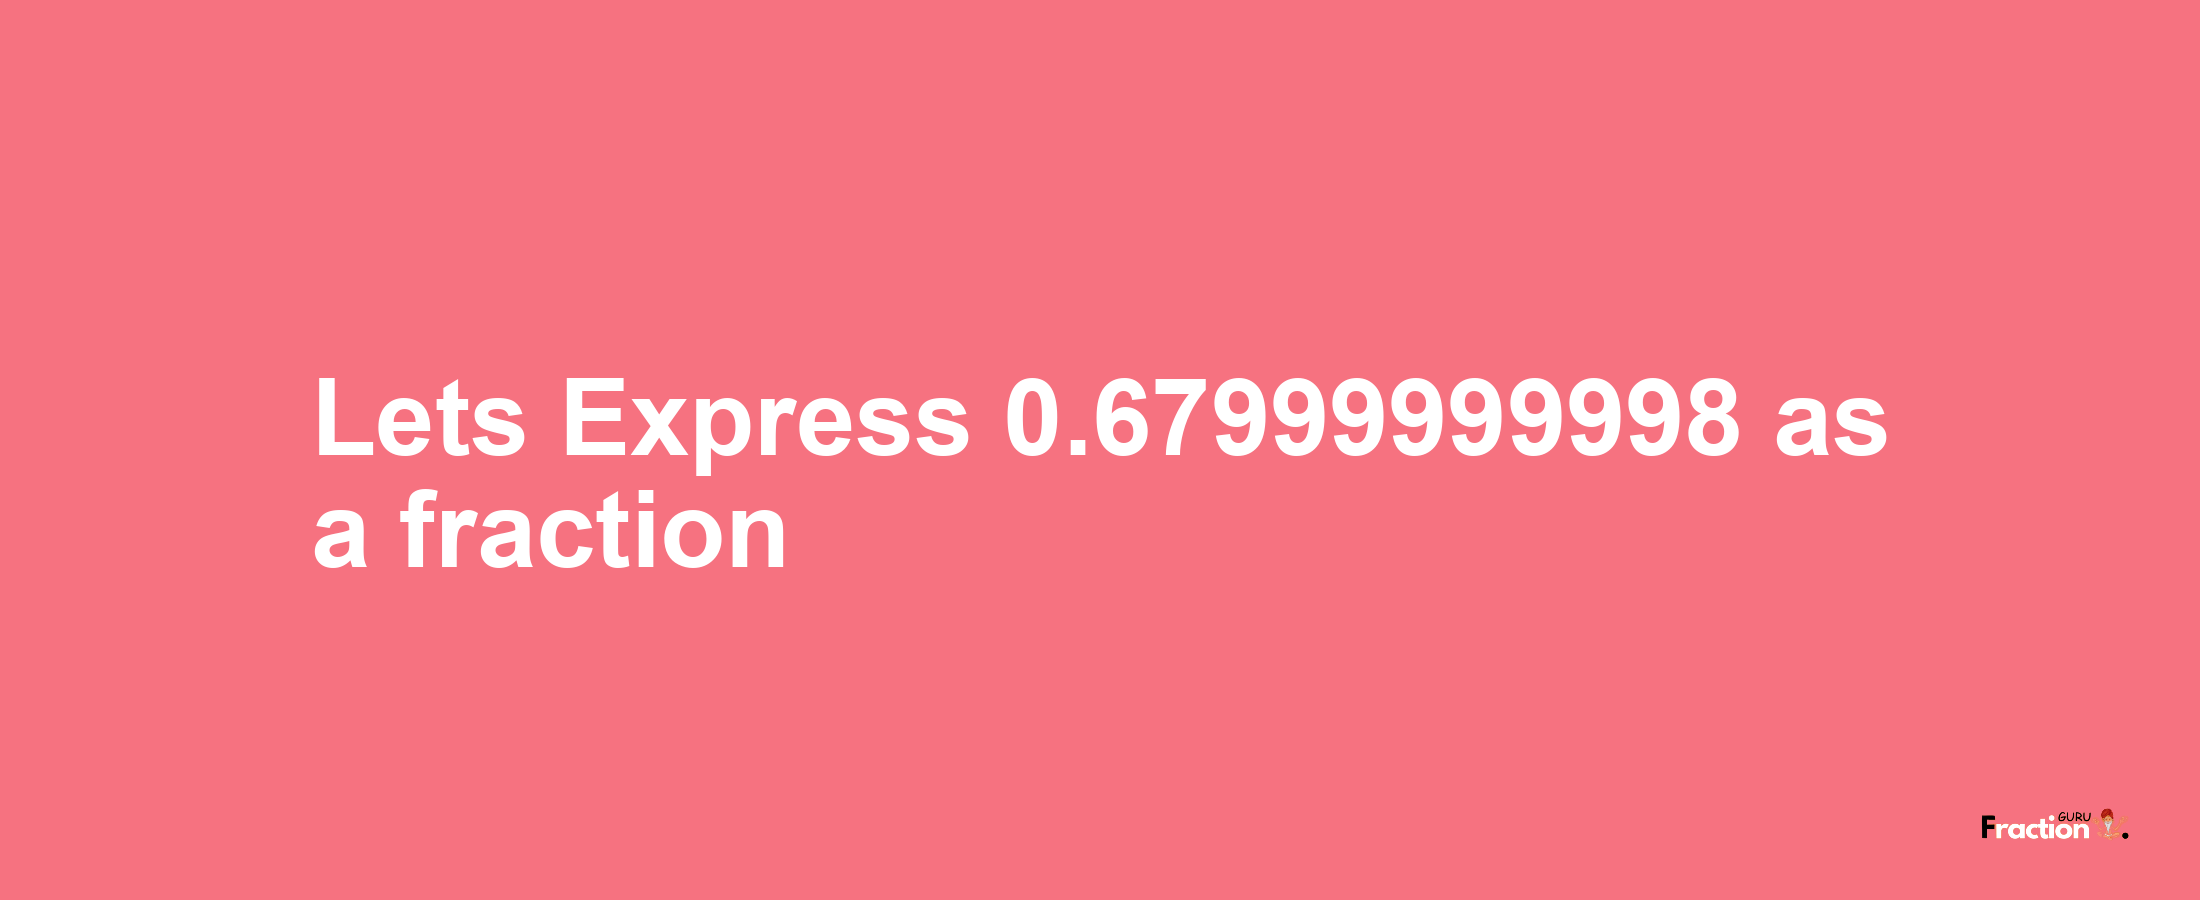 Lets Express 0.67999999998 as afraction